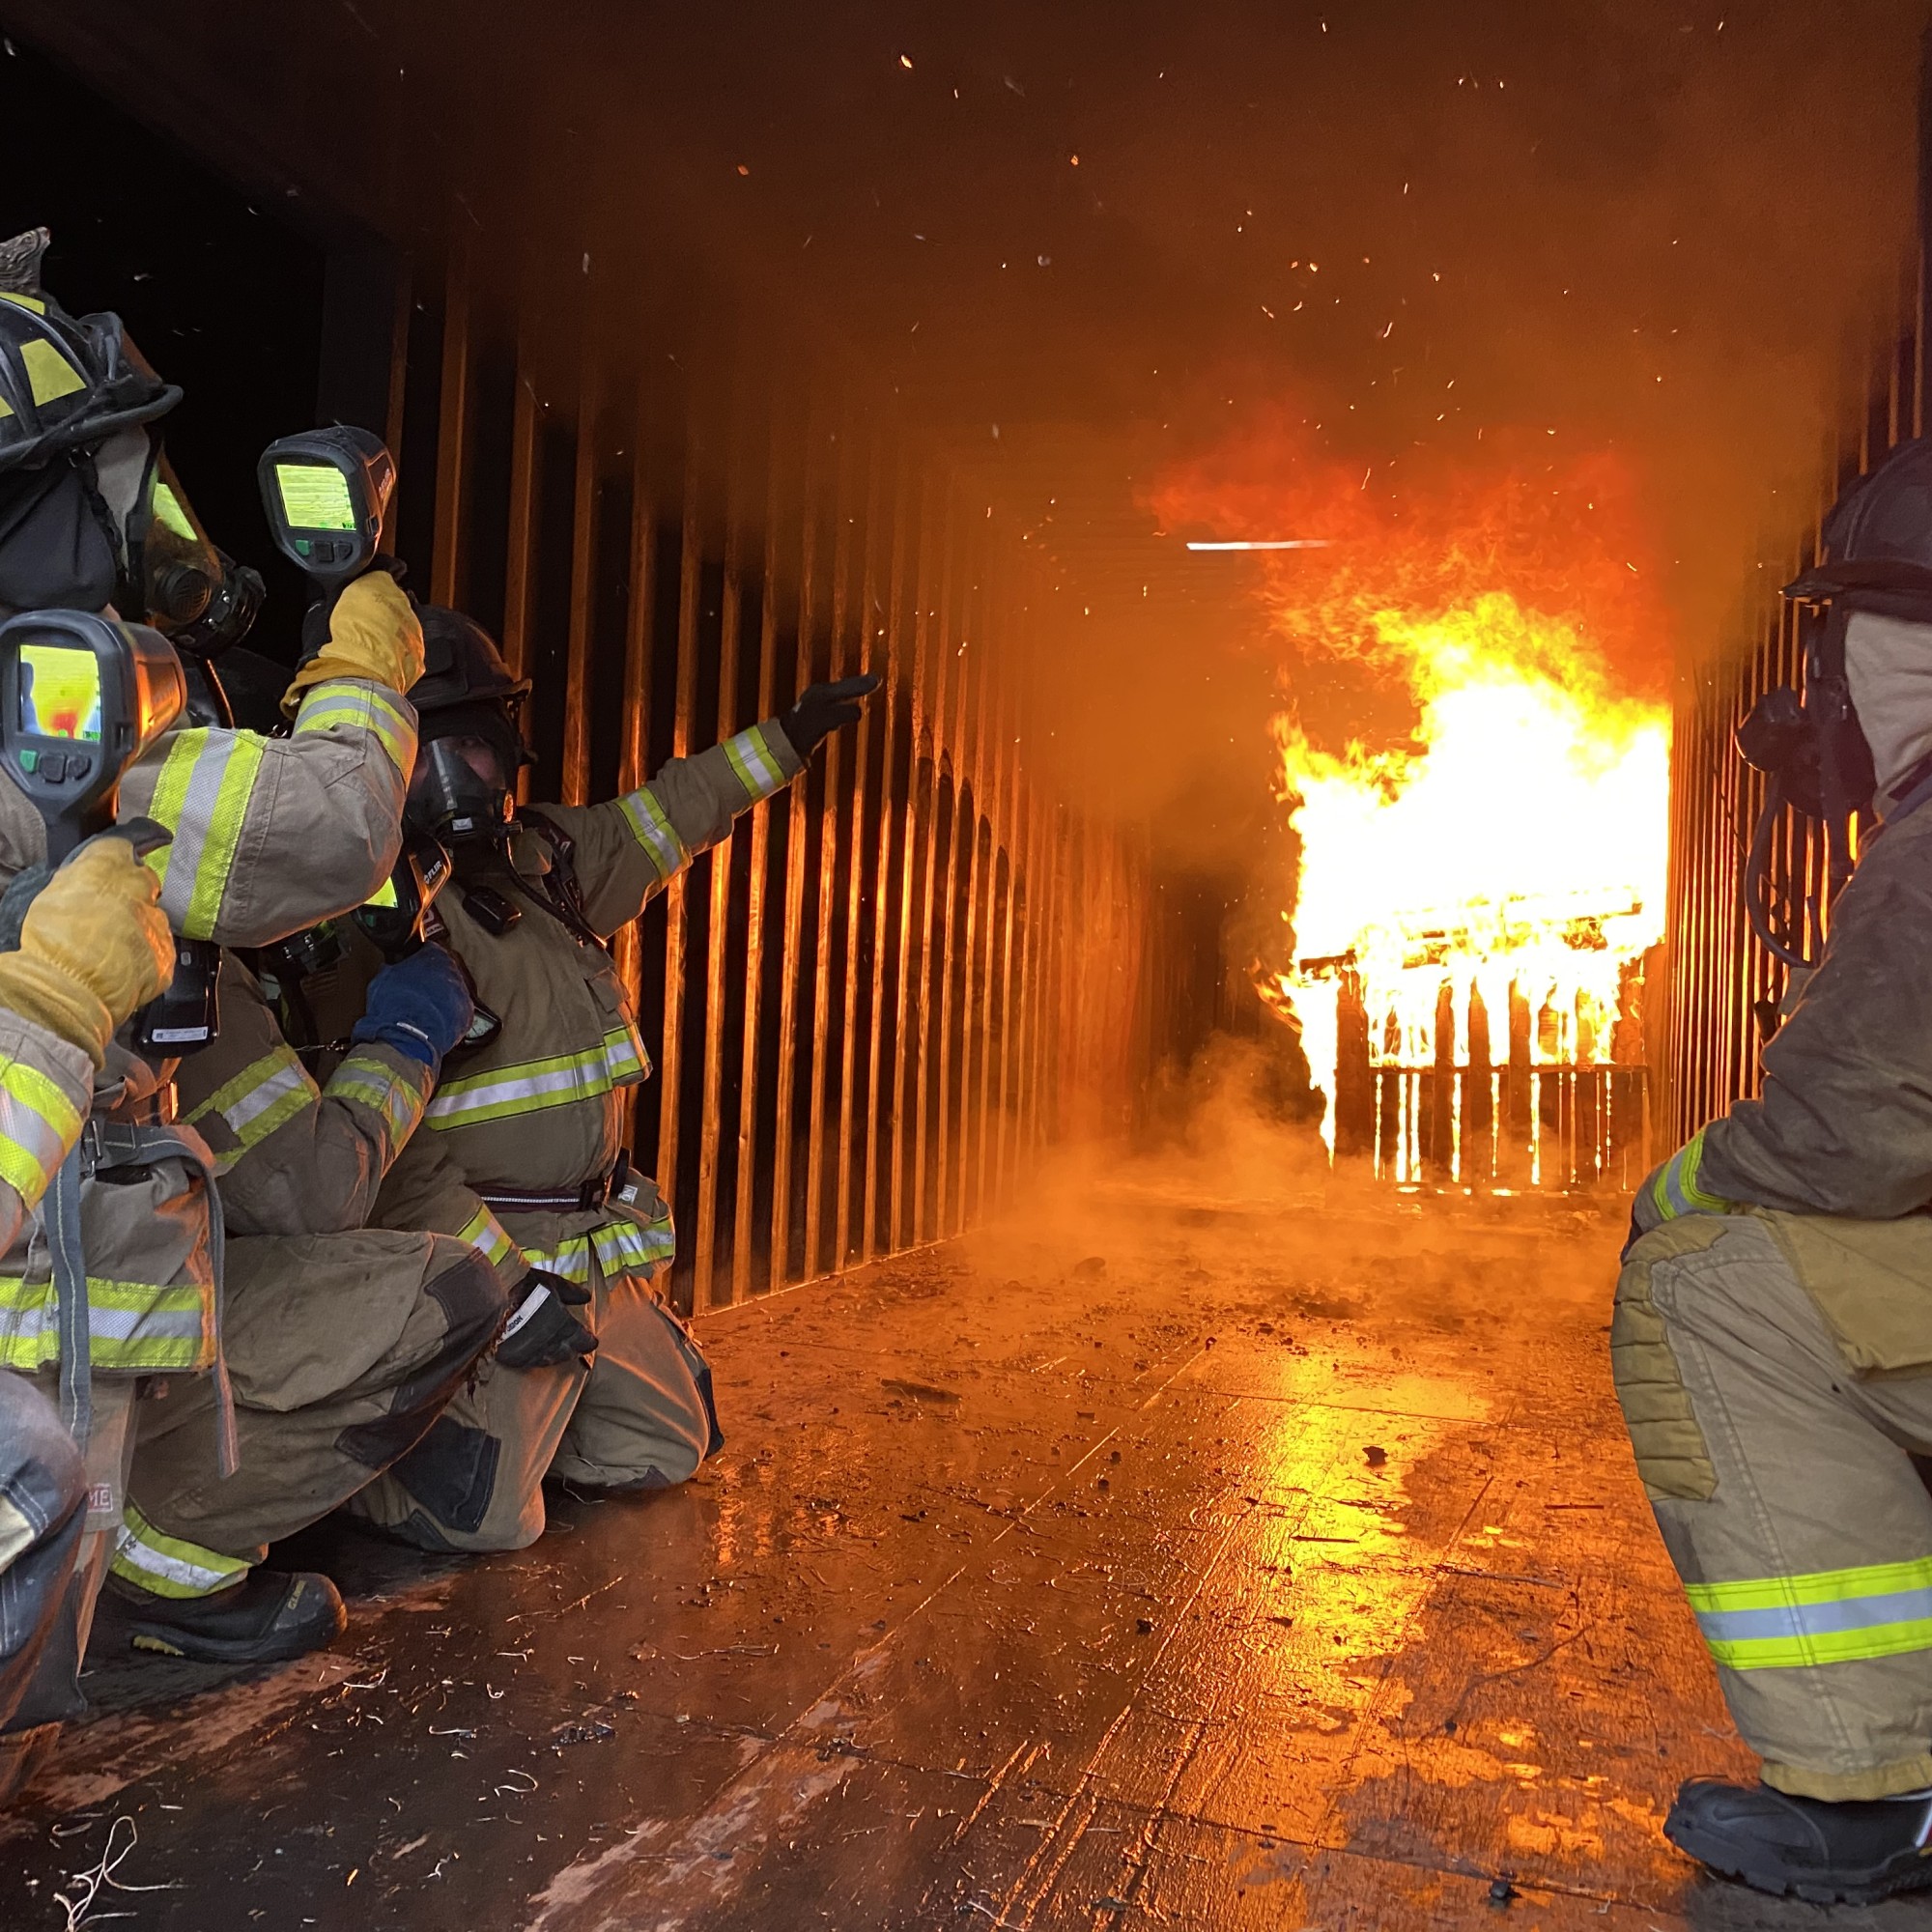 Fire Service Technology students during live fire training